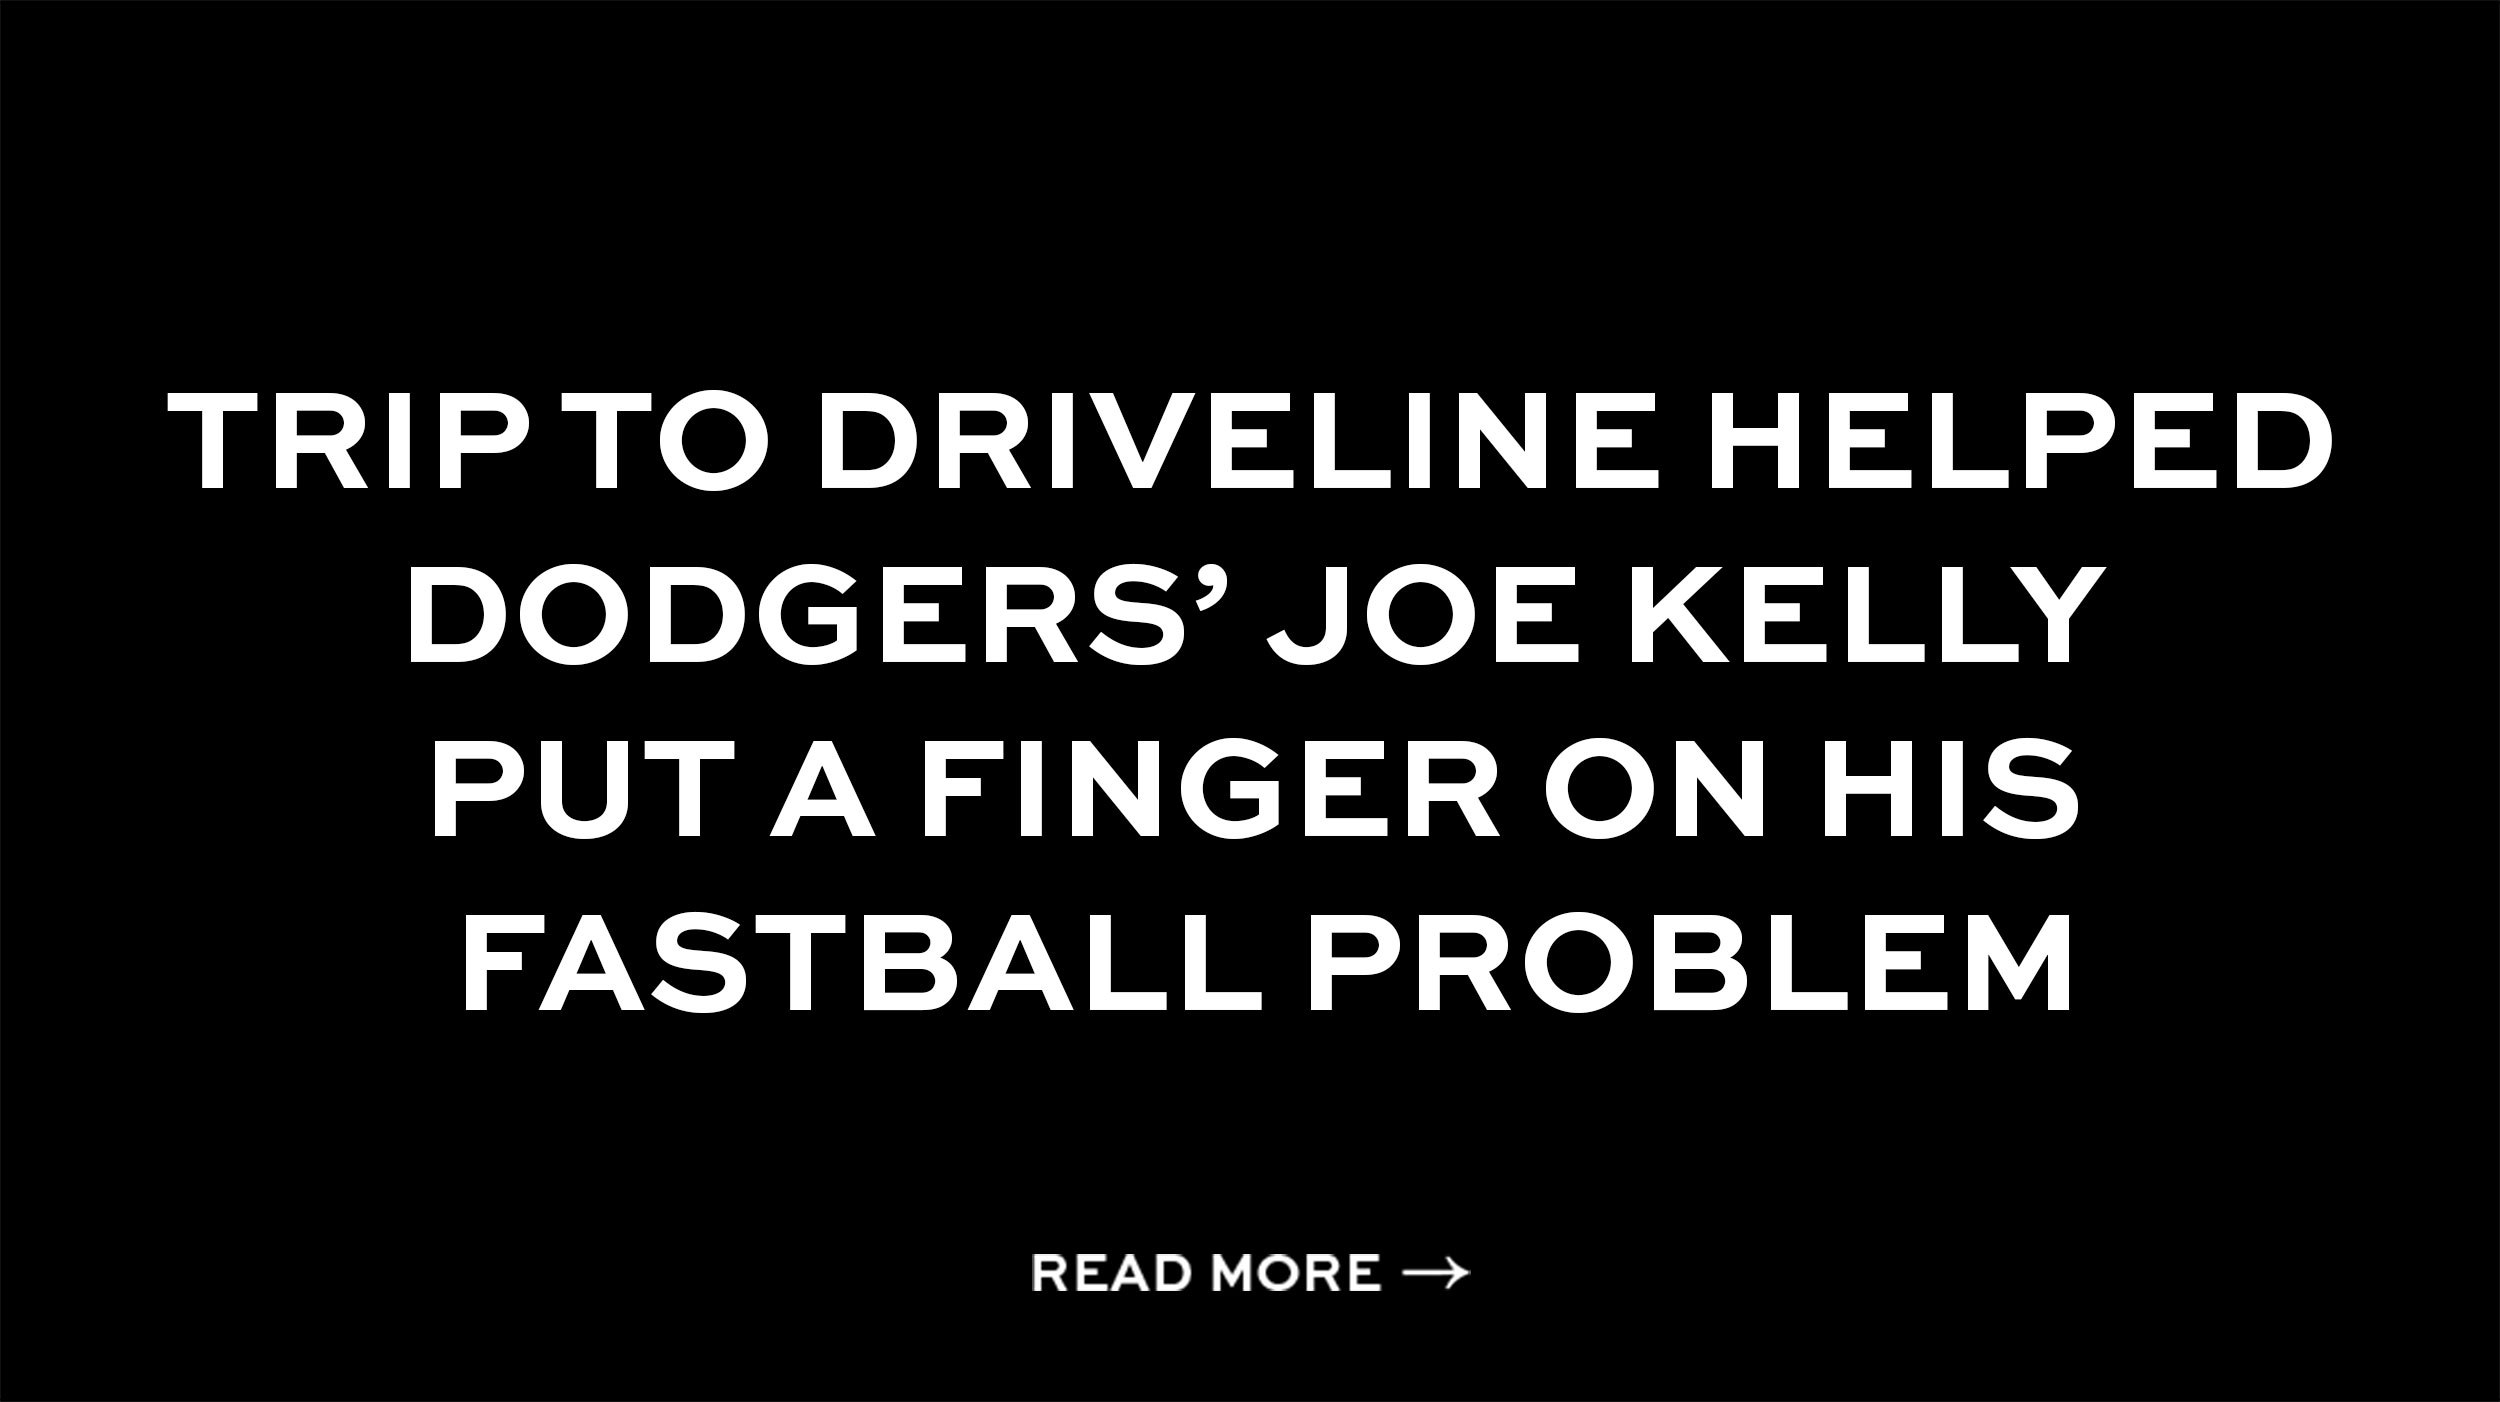 Trip to Driveline helped Dodgers’ Joe Kelly put a finger on his fastball problem